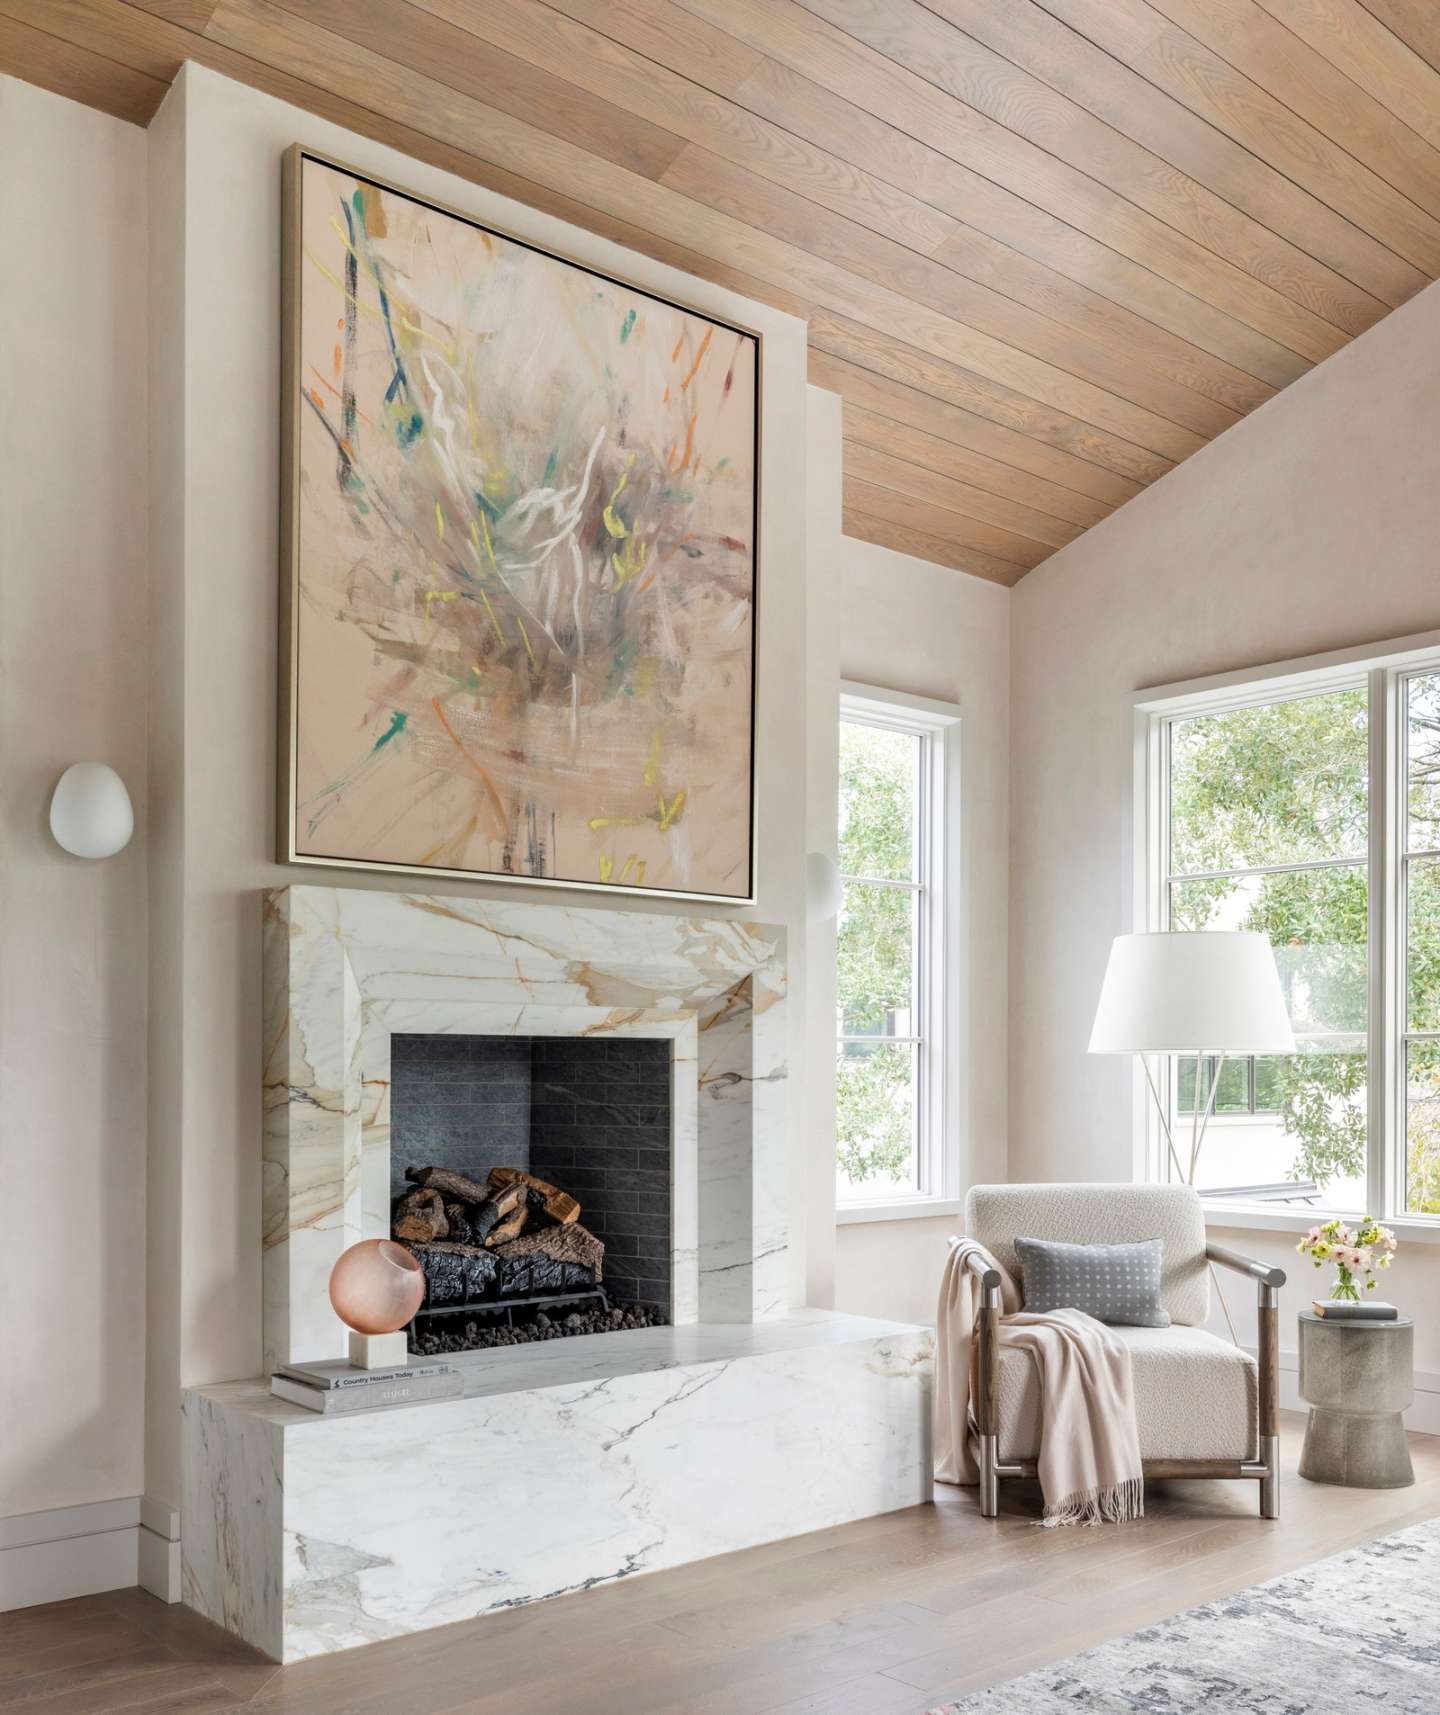 Fireplace Ideas That Make a Statement and Dress Up Any Room